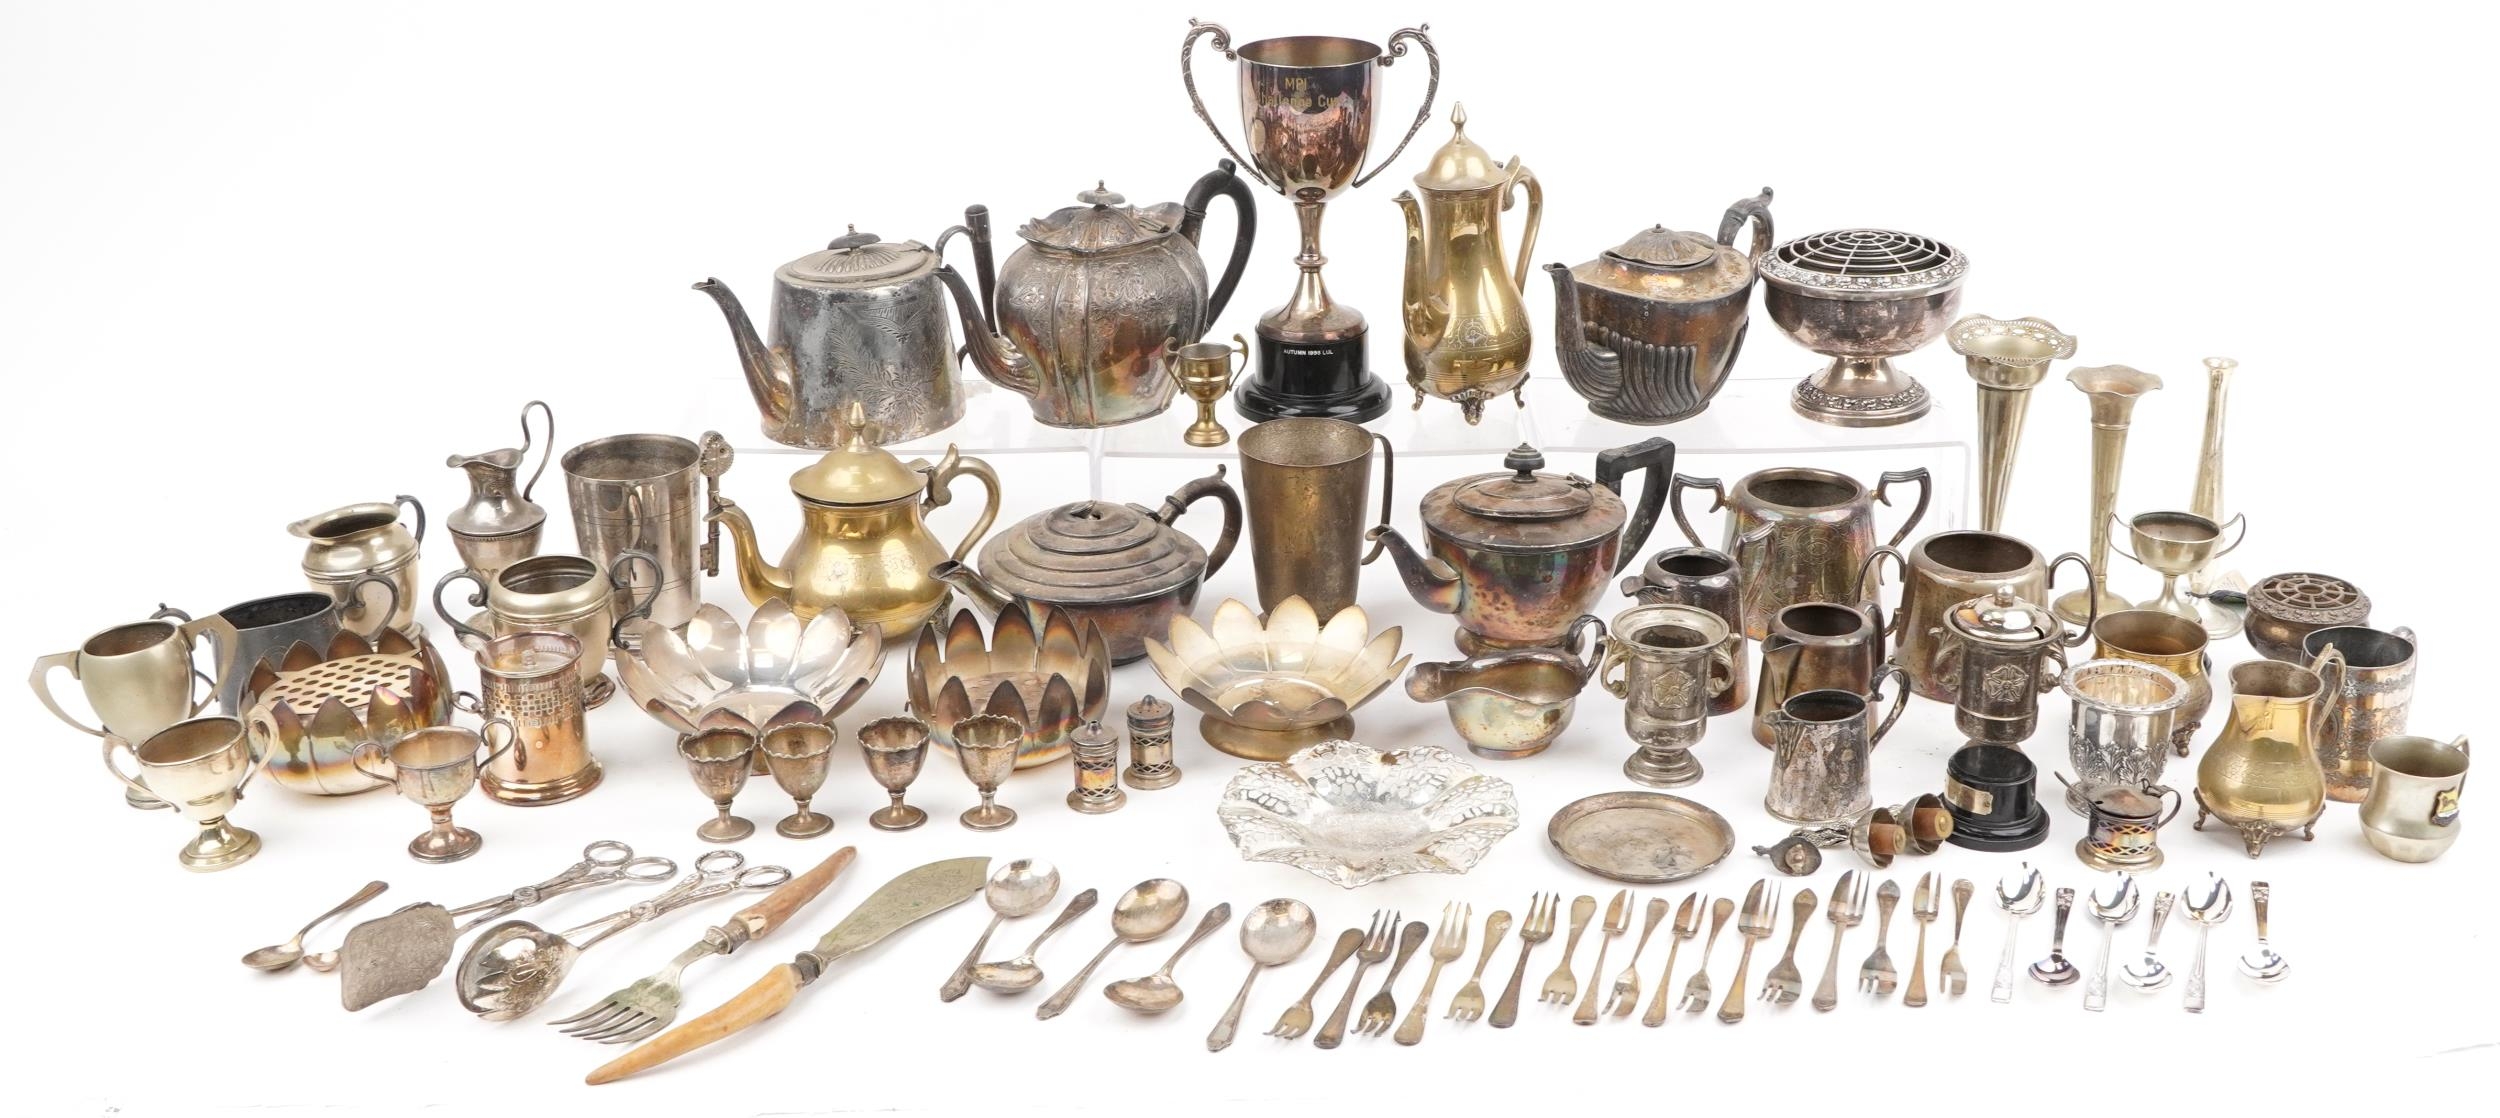 Silver plated metalware including pair of campana urns, trophy, coffee pot and teapot